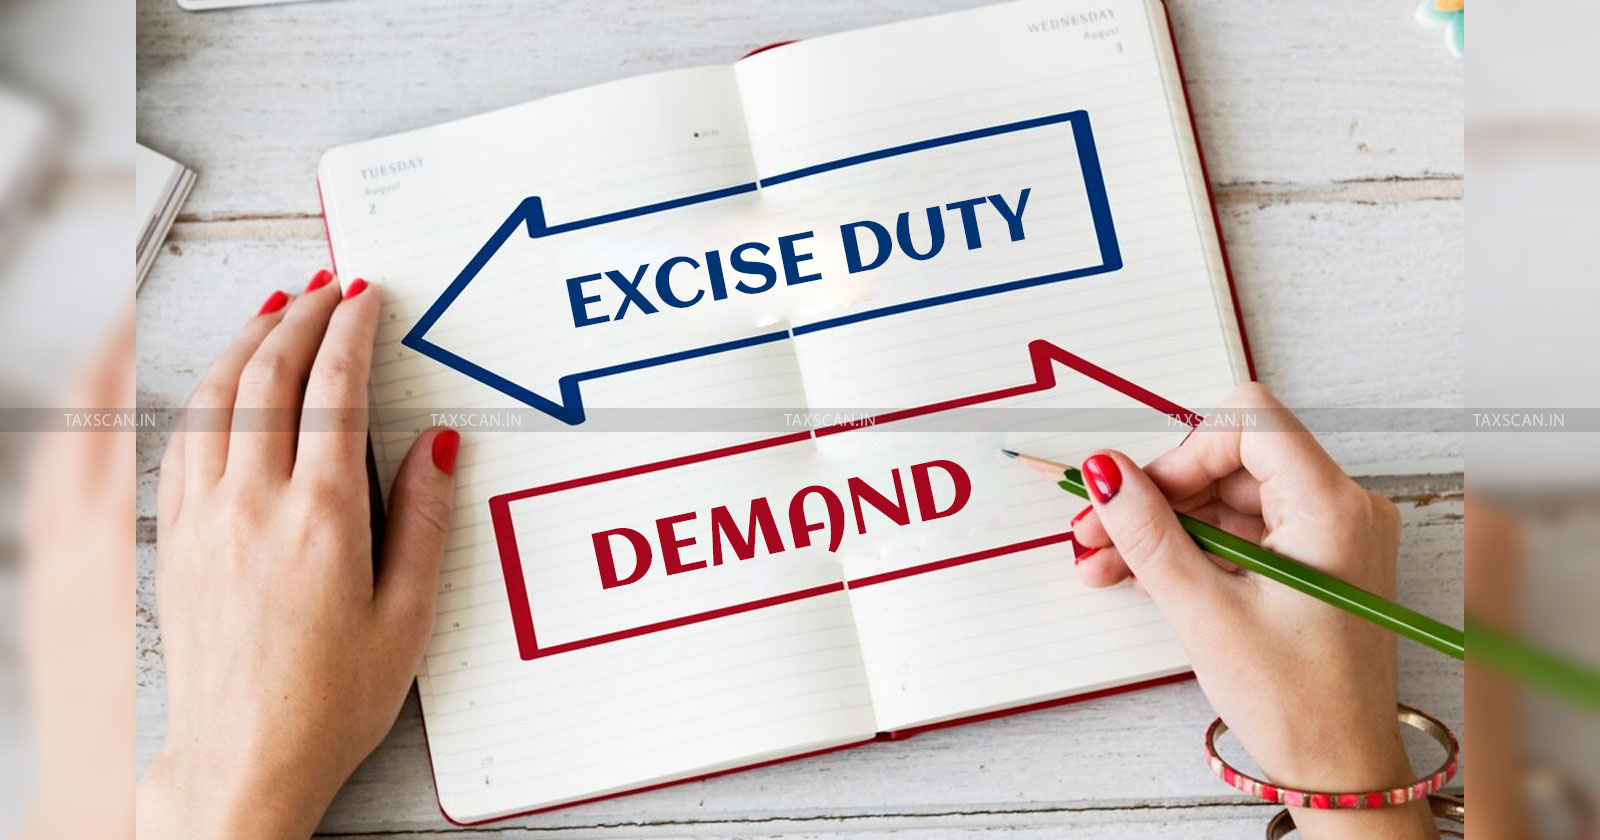 Sufficient Evidence - Excise Dept - CESTAT - Excise Duty Demand - Sufficient Evidence on Dispatch of orders by Excise Dept - taxscan